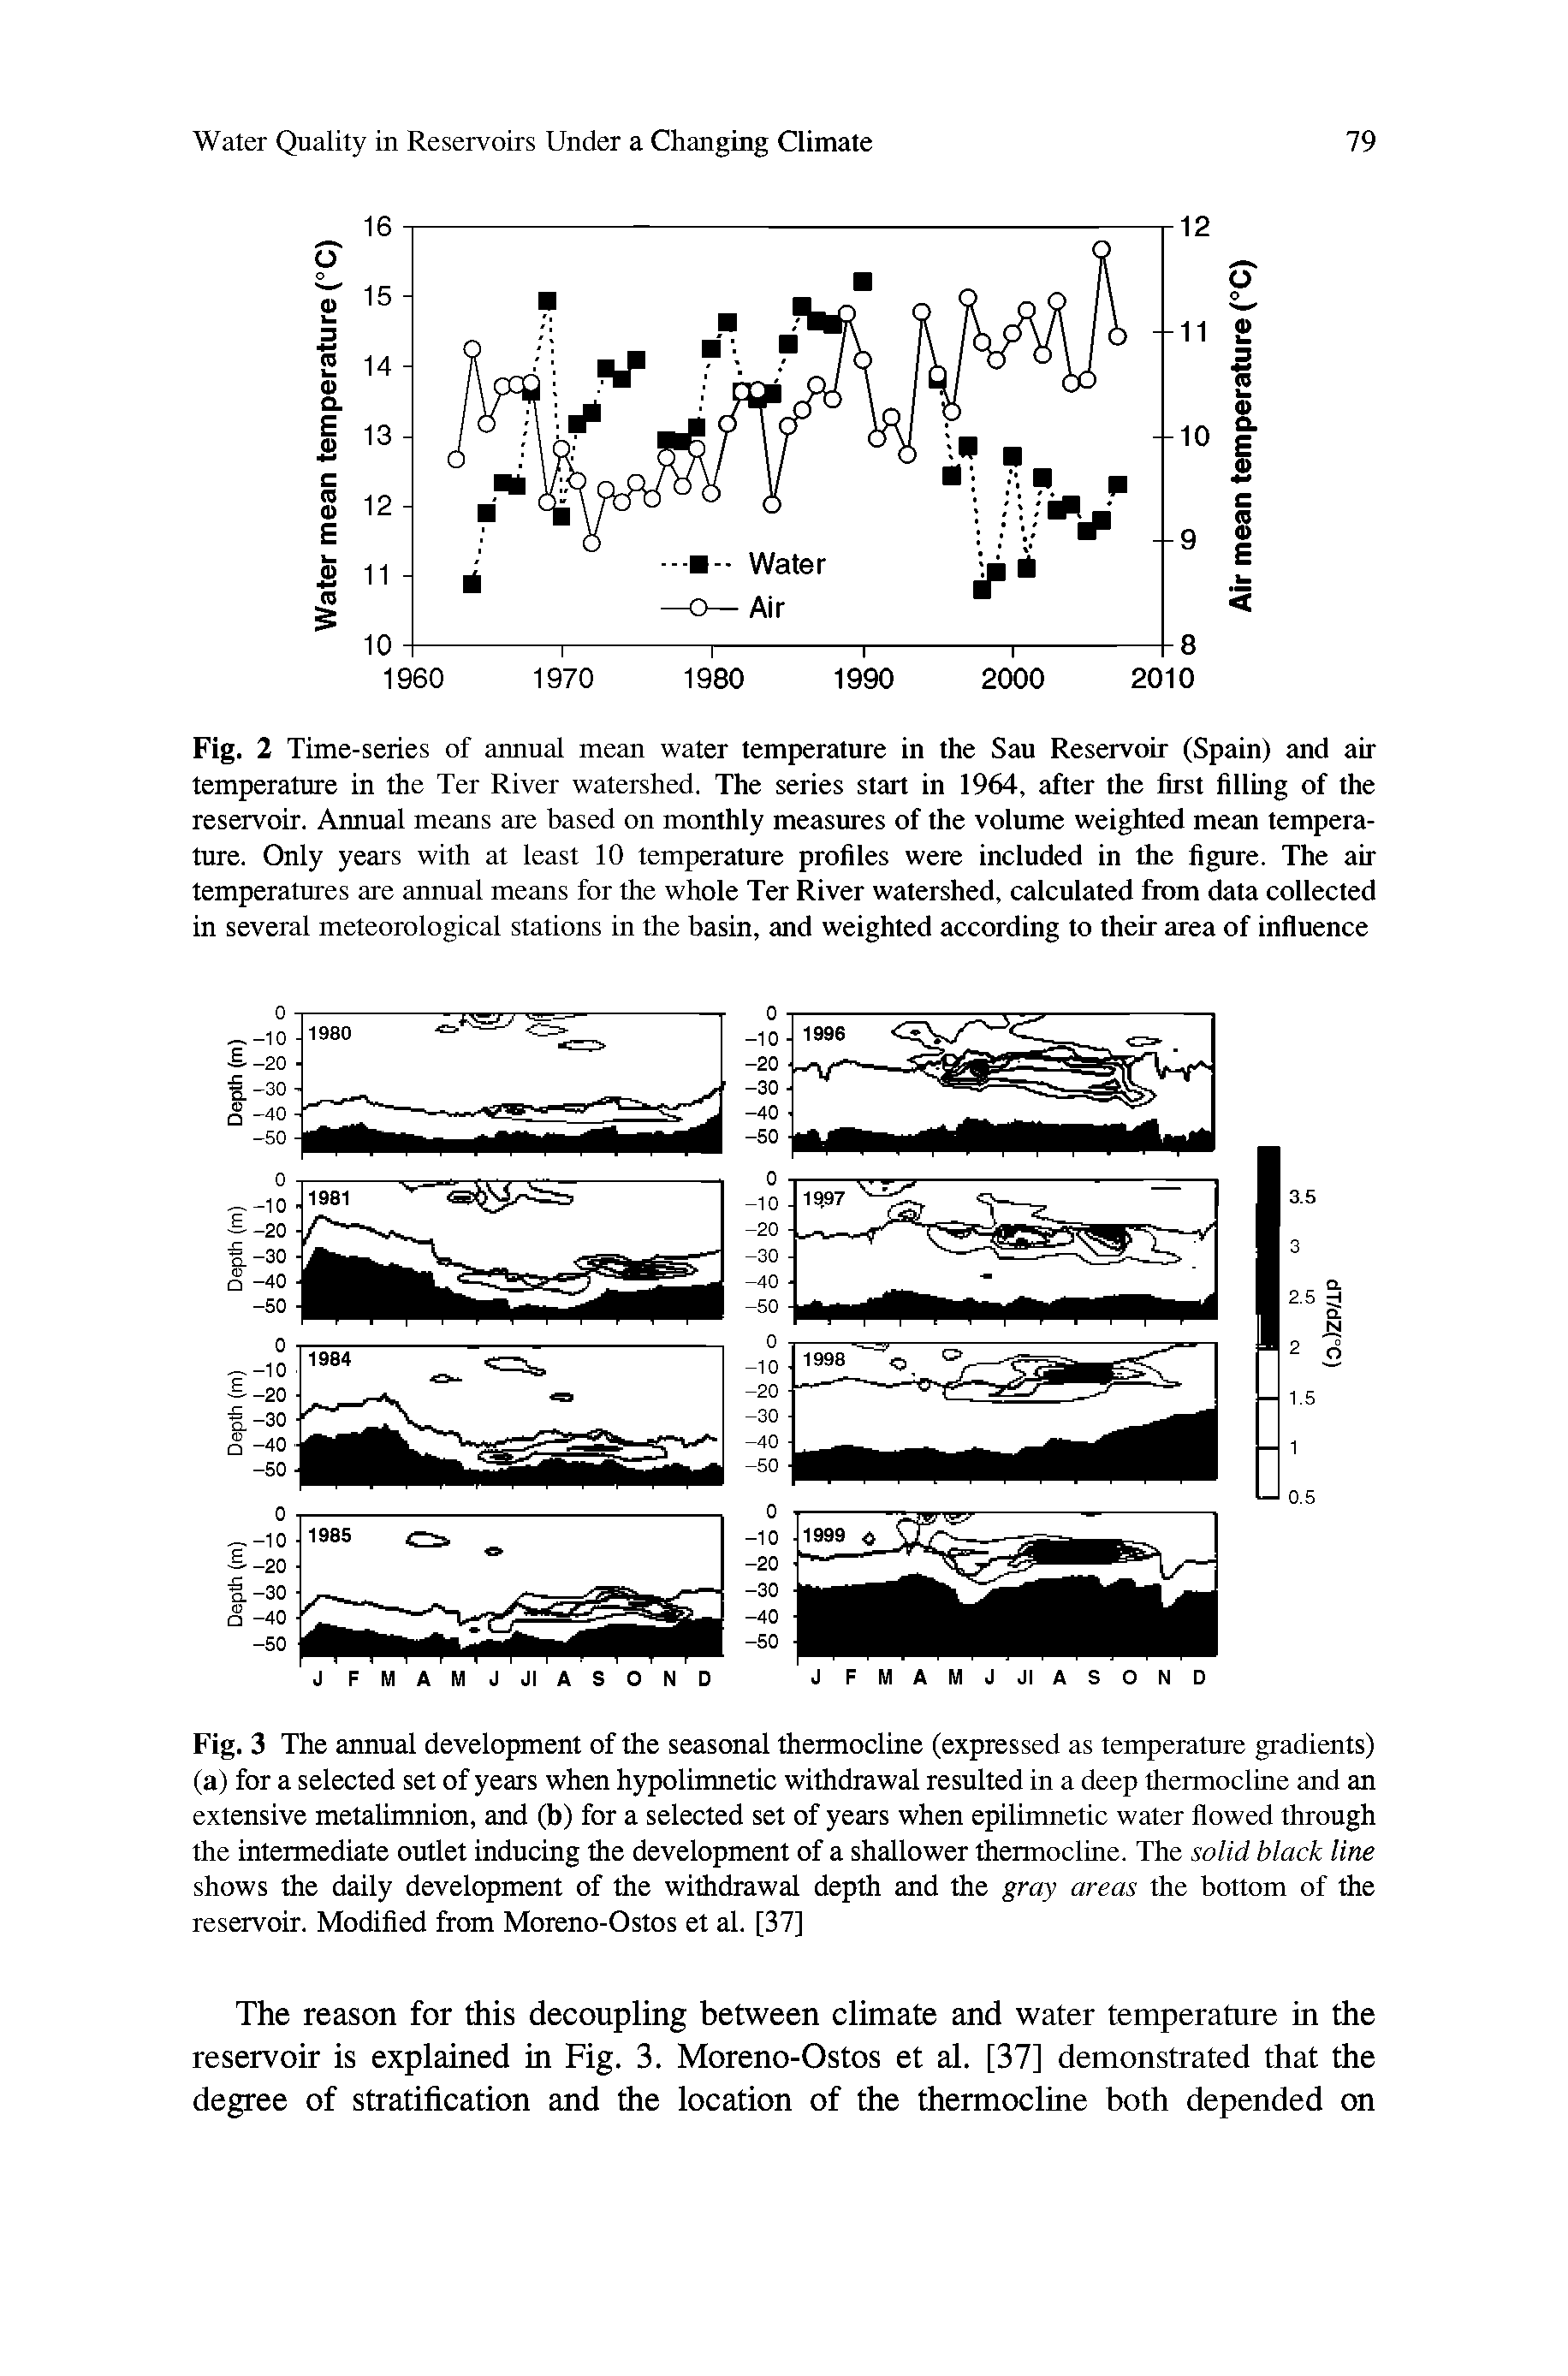 Fig. 3 The annual development of the seasonal thermocline (expressed as temperature gradients) (a) for a selected set of years when hypolimnetic withdrawal resulted in a deep thermocline and an extensive metalimnion, and (b) for a selected set of years when epilimnetic water flowed through the intermediate outlet inducing the development of a shallower thermocline. The solid black line shows the daily development of the withdrawal depth and the gray areas the bottom of the reservoir. Modified from Moreno-Ostos et al. [37]...